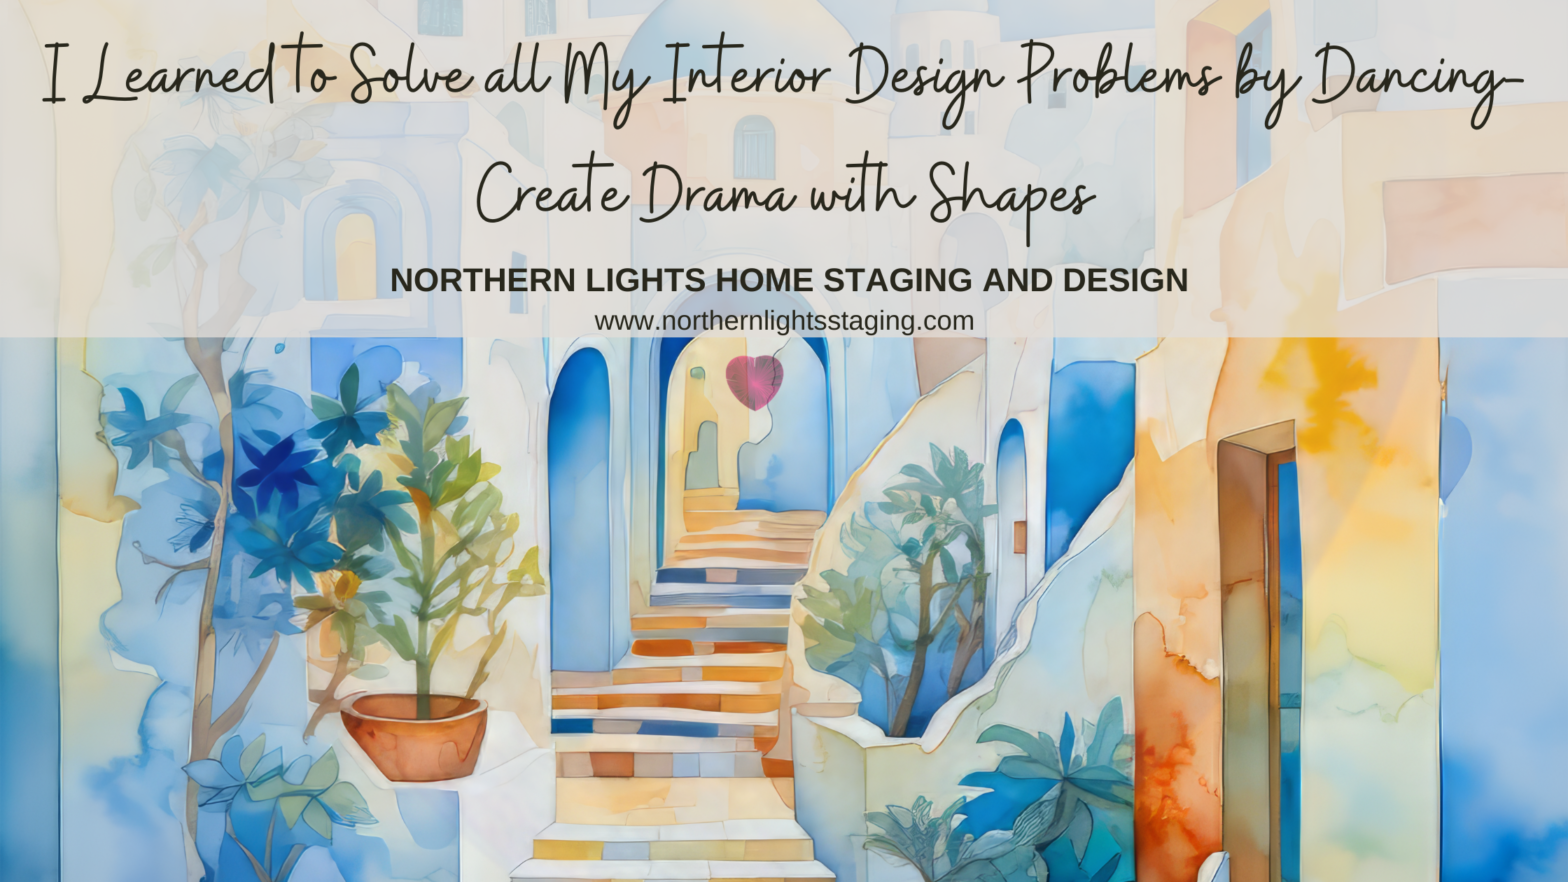 I Learned to Solve all My Interior Design Problems by Dancing- Create Drama with Shapes